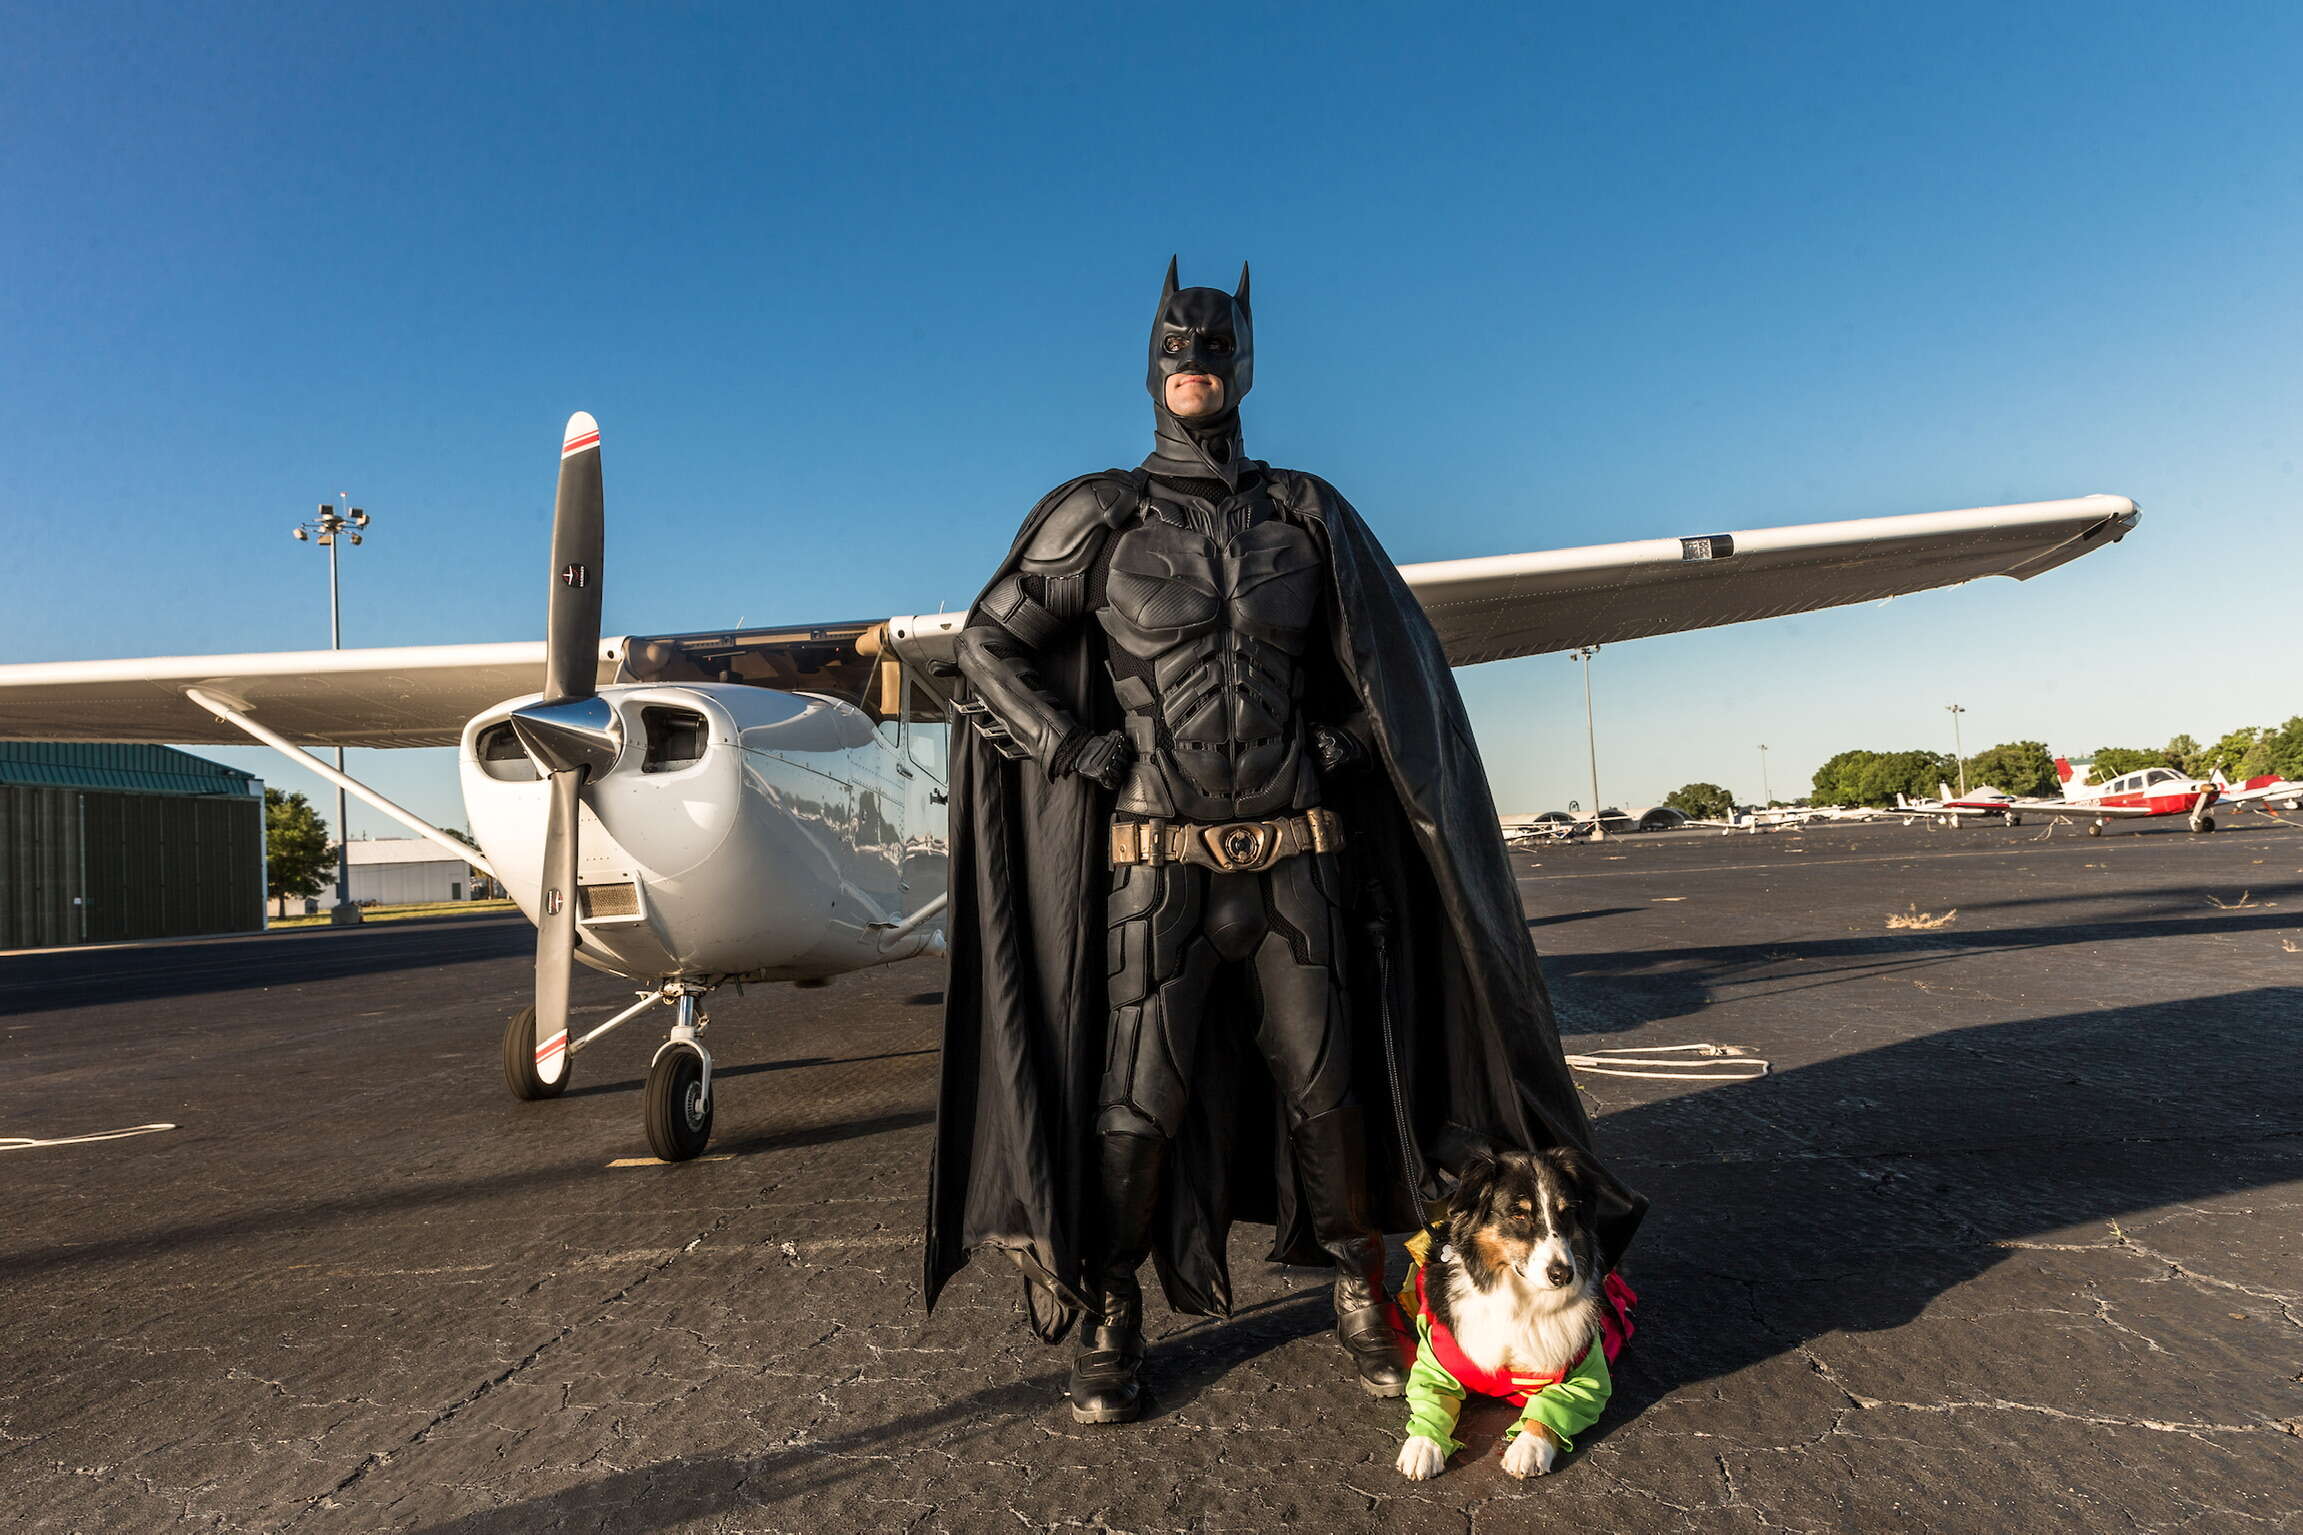 Batman and his dog, dressed as Robin